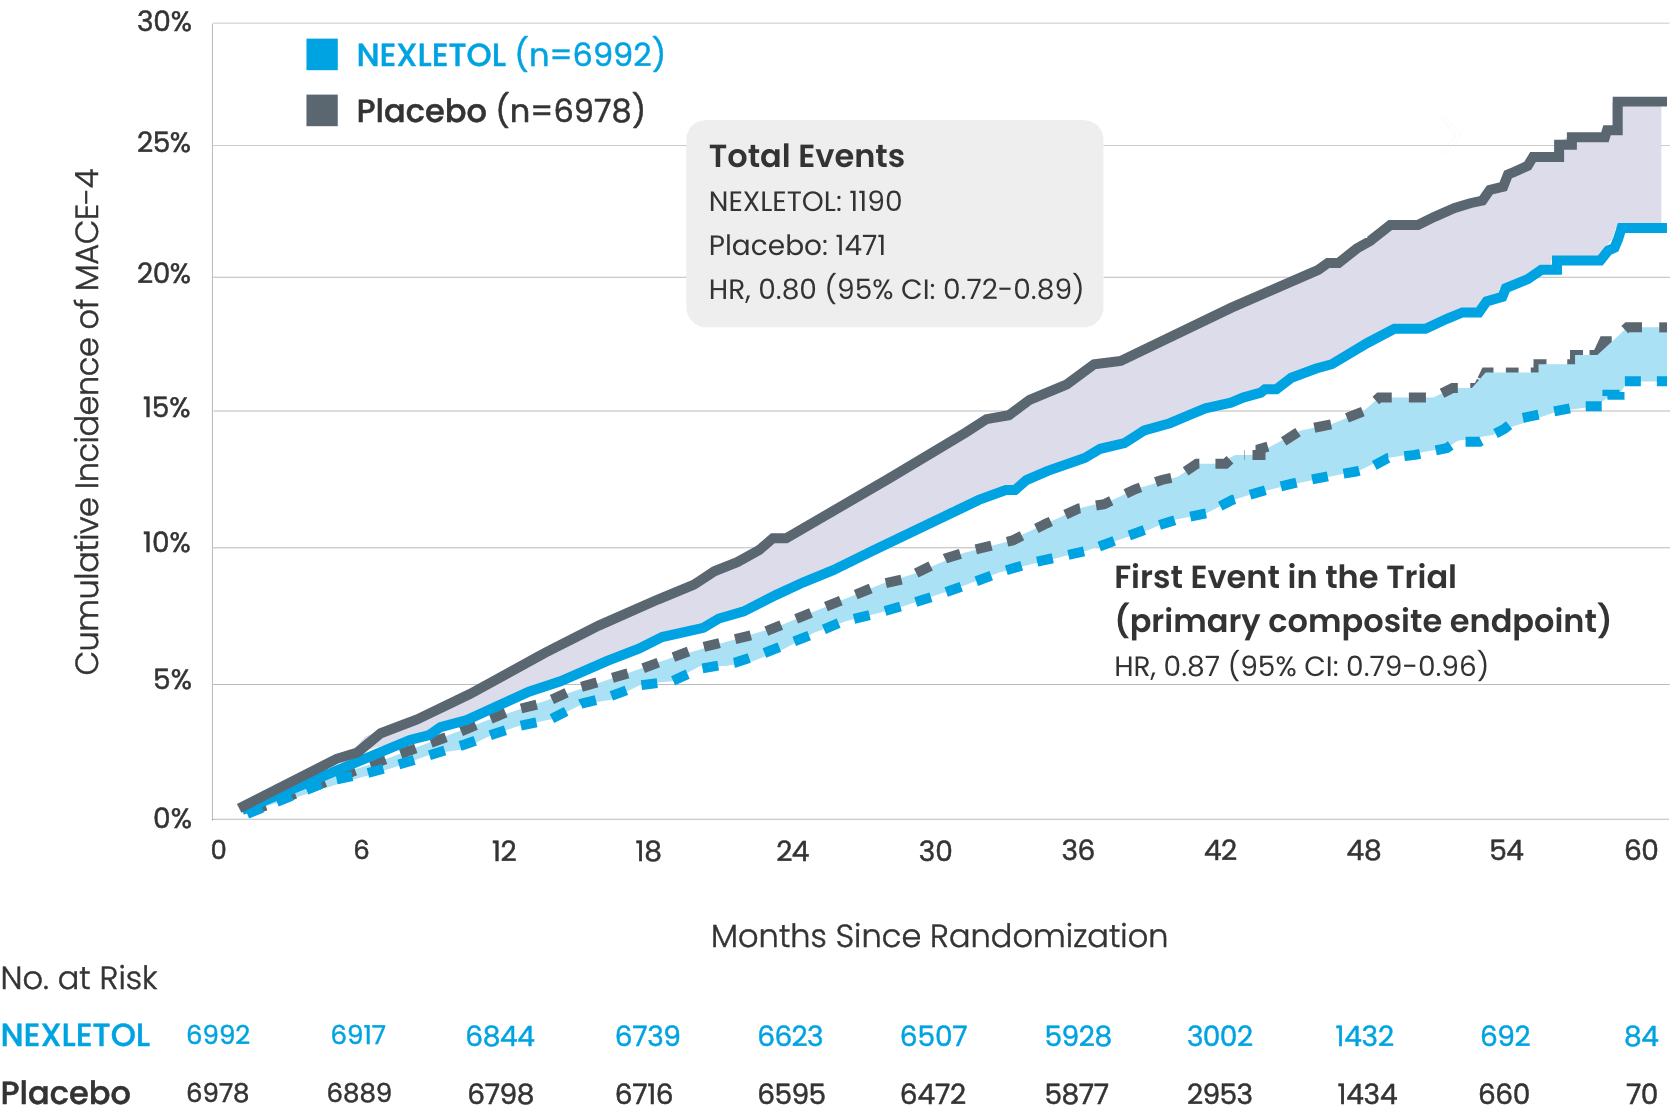 a chart, with a KM curve, showing the difference between the first event and the total number of events among patients taking NEXLETOL vs placebo in the CLEAR Outcomes Trial